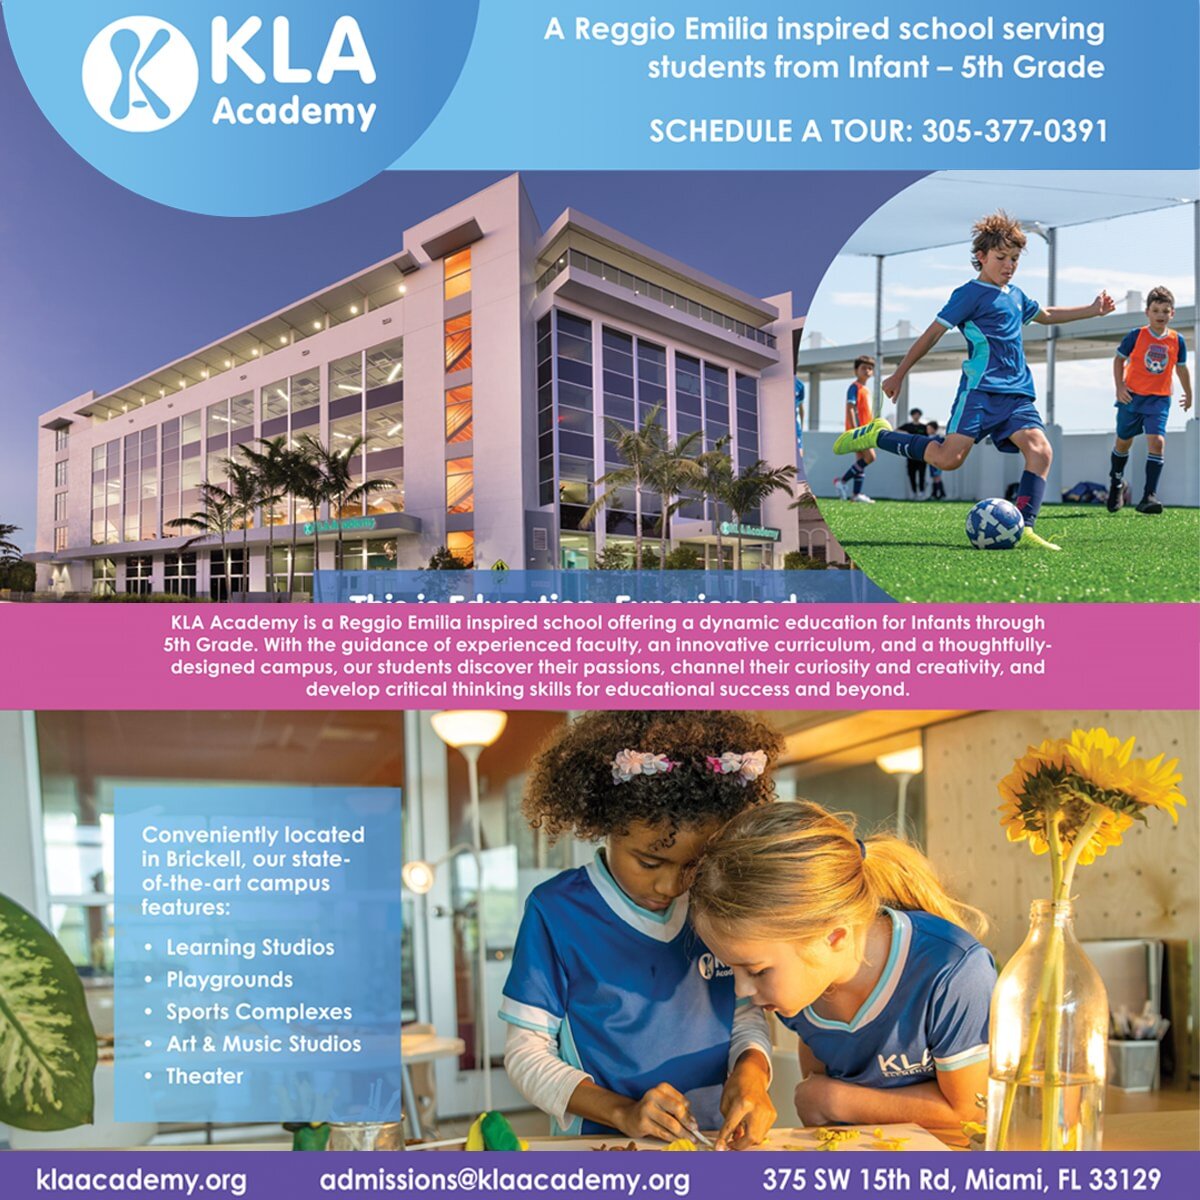 KLA is a global leader in learning by design, serving children 3 months through 5th Grade. Their goal is to provide a place where children&rsquo;s abilities, competencies, and natural aptitudes are nurtured in ways that develop new and inherent talen